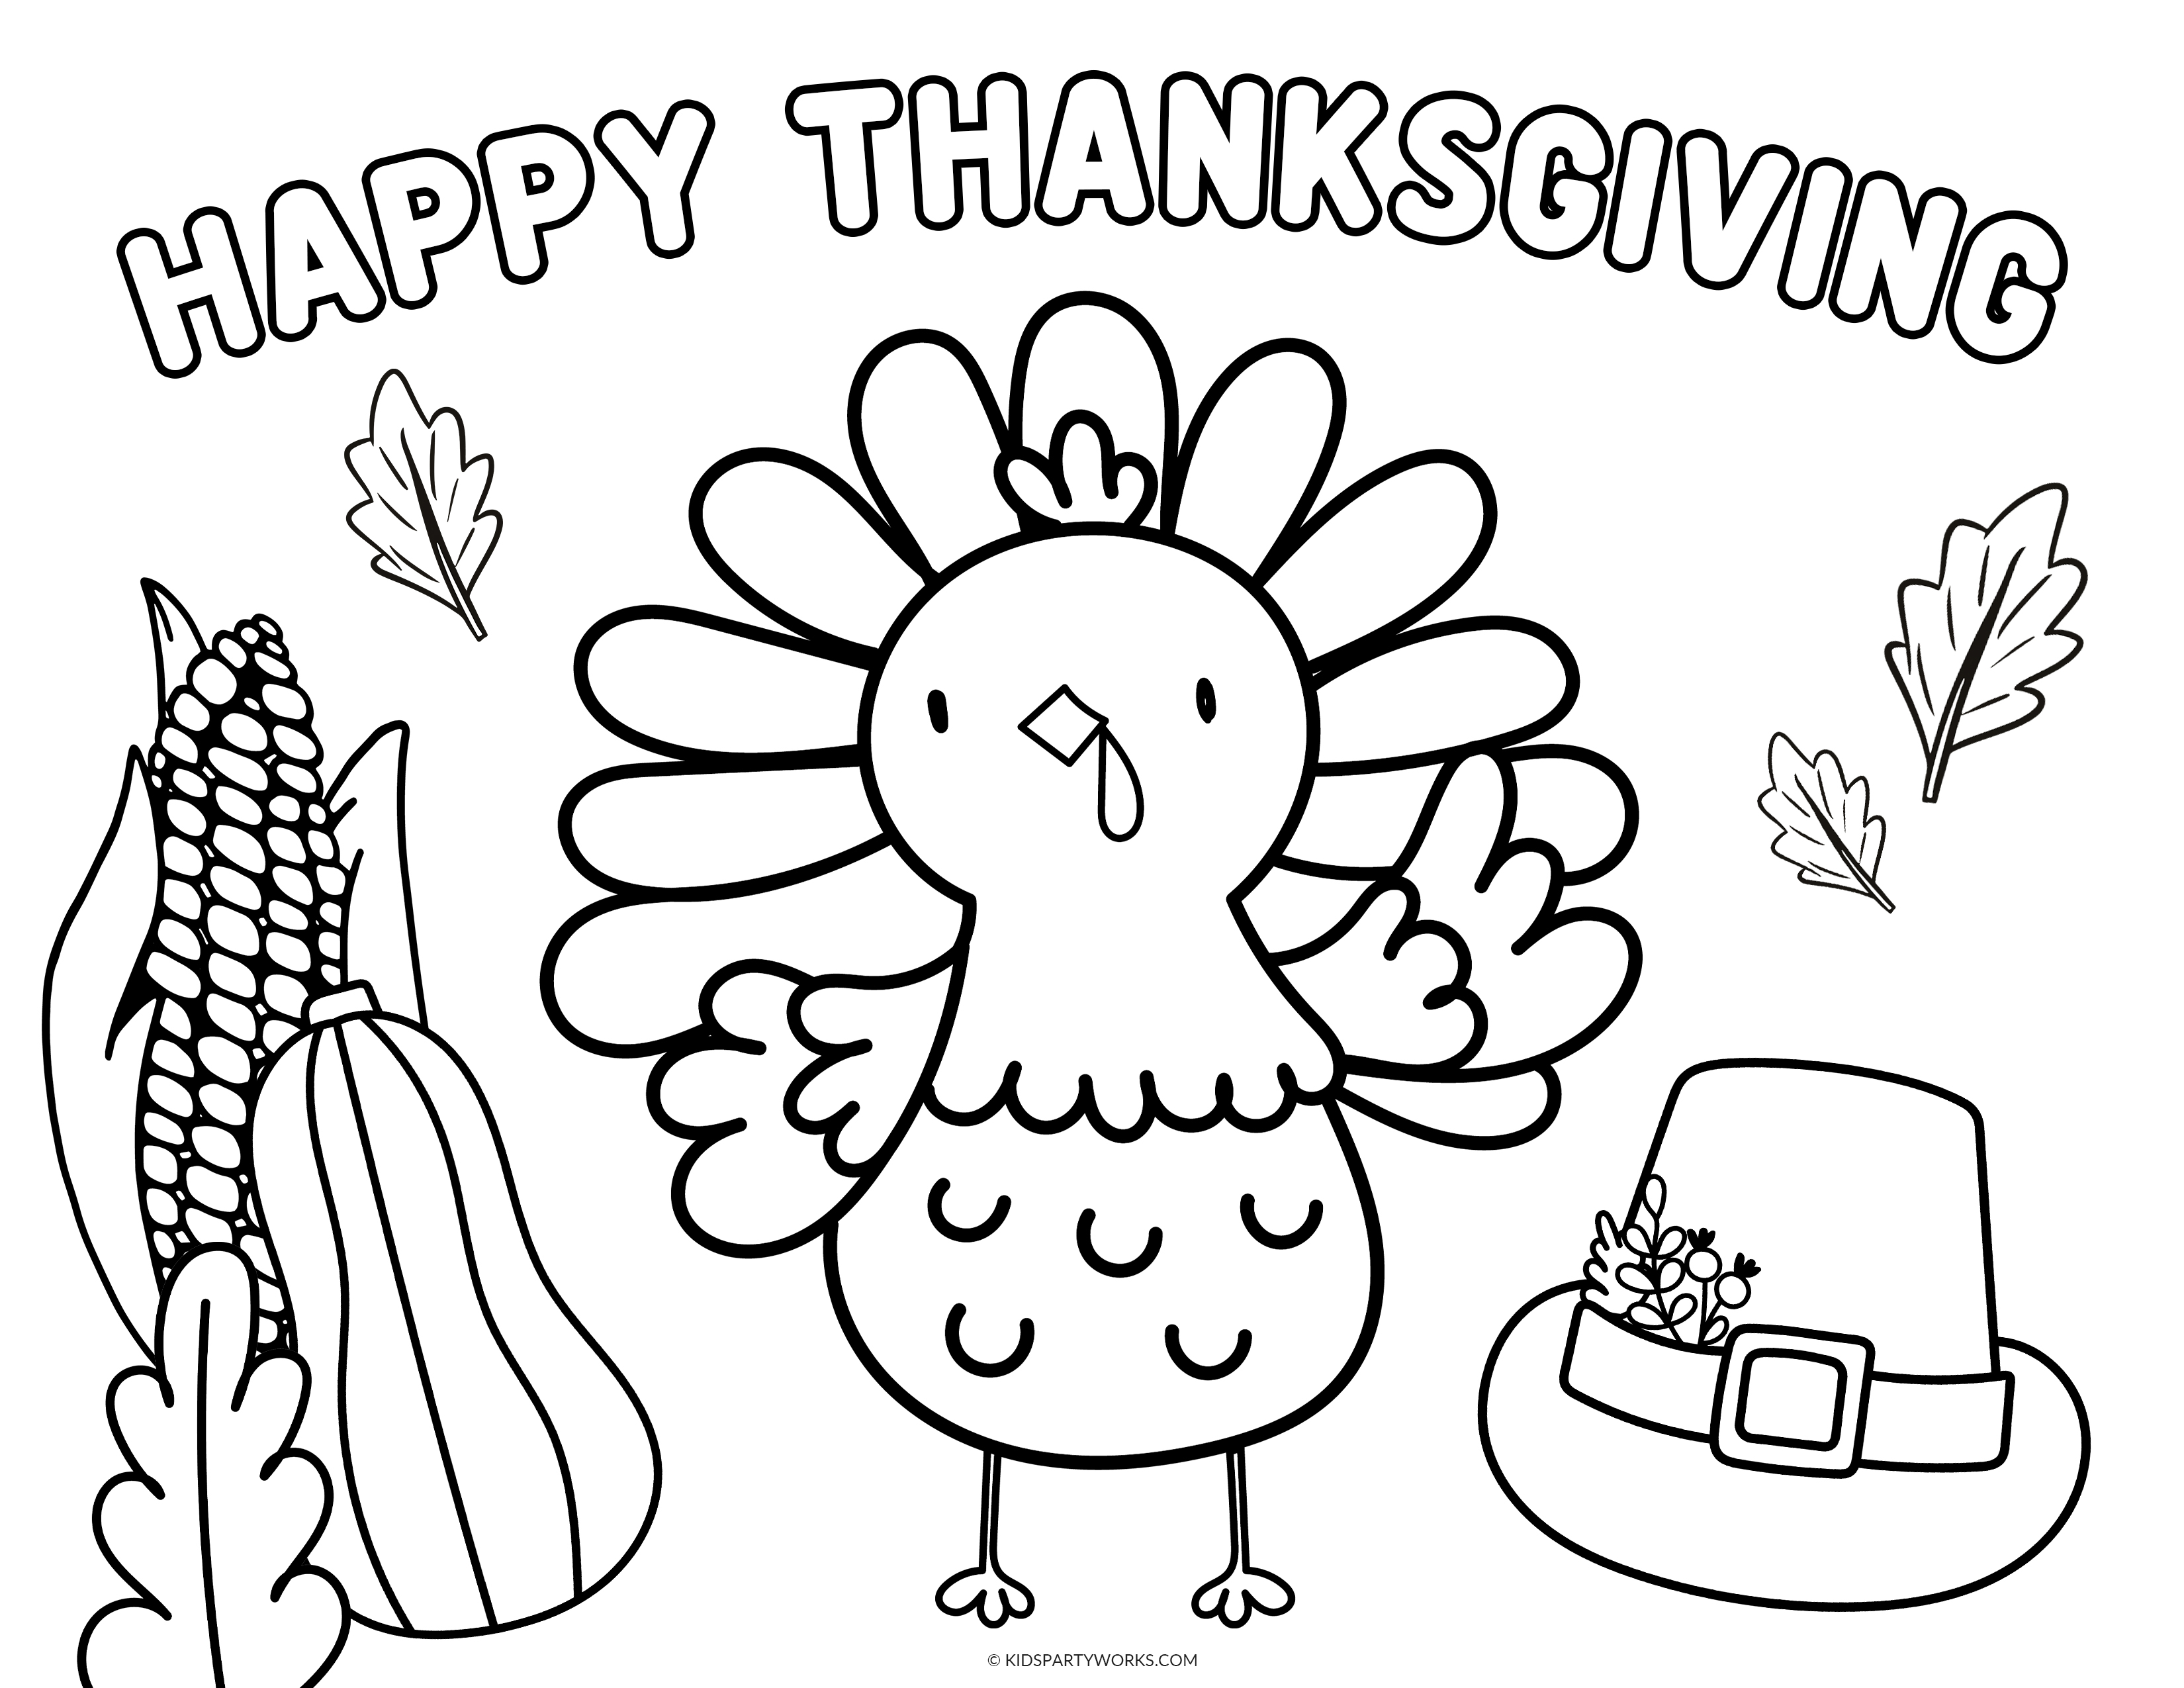 turkey-coloring-page-21-mine7